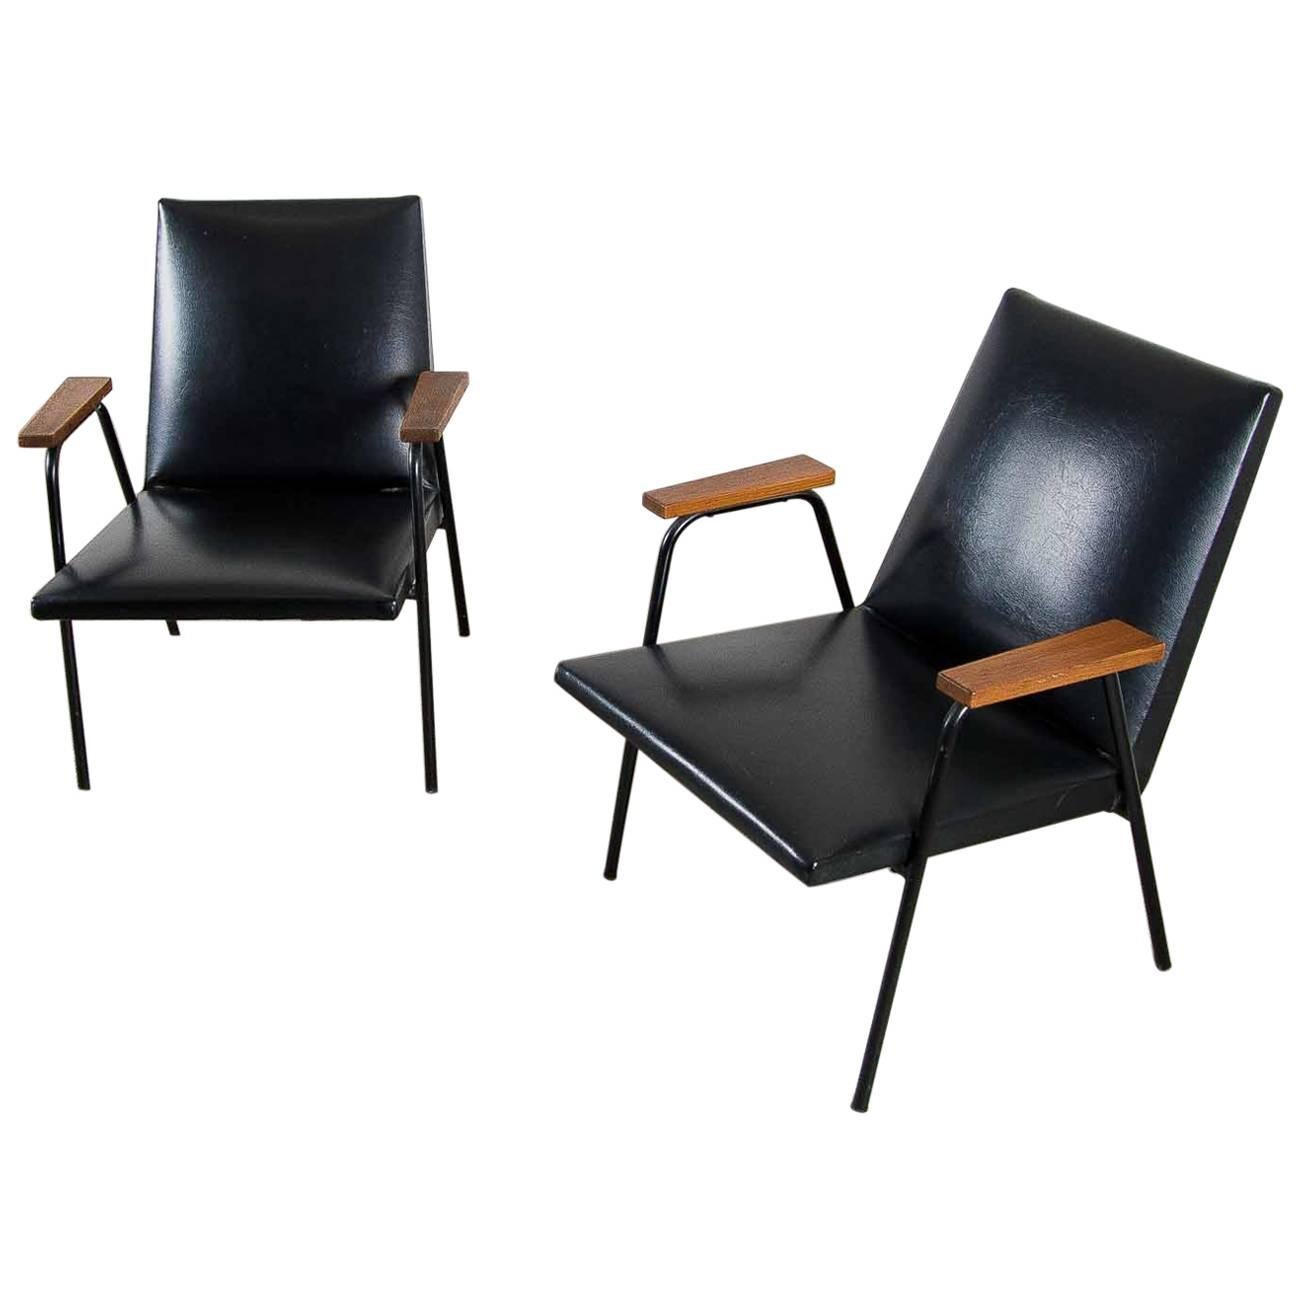 Two Easy Chairs by Pierre Guariche